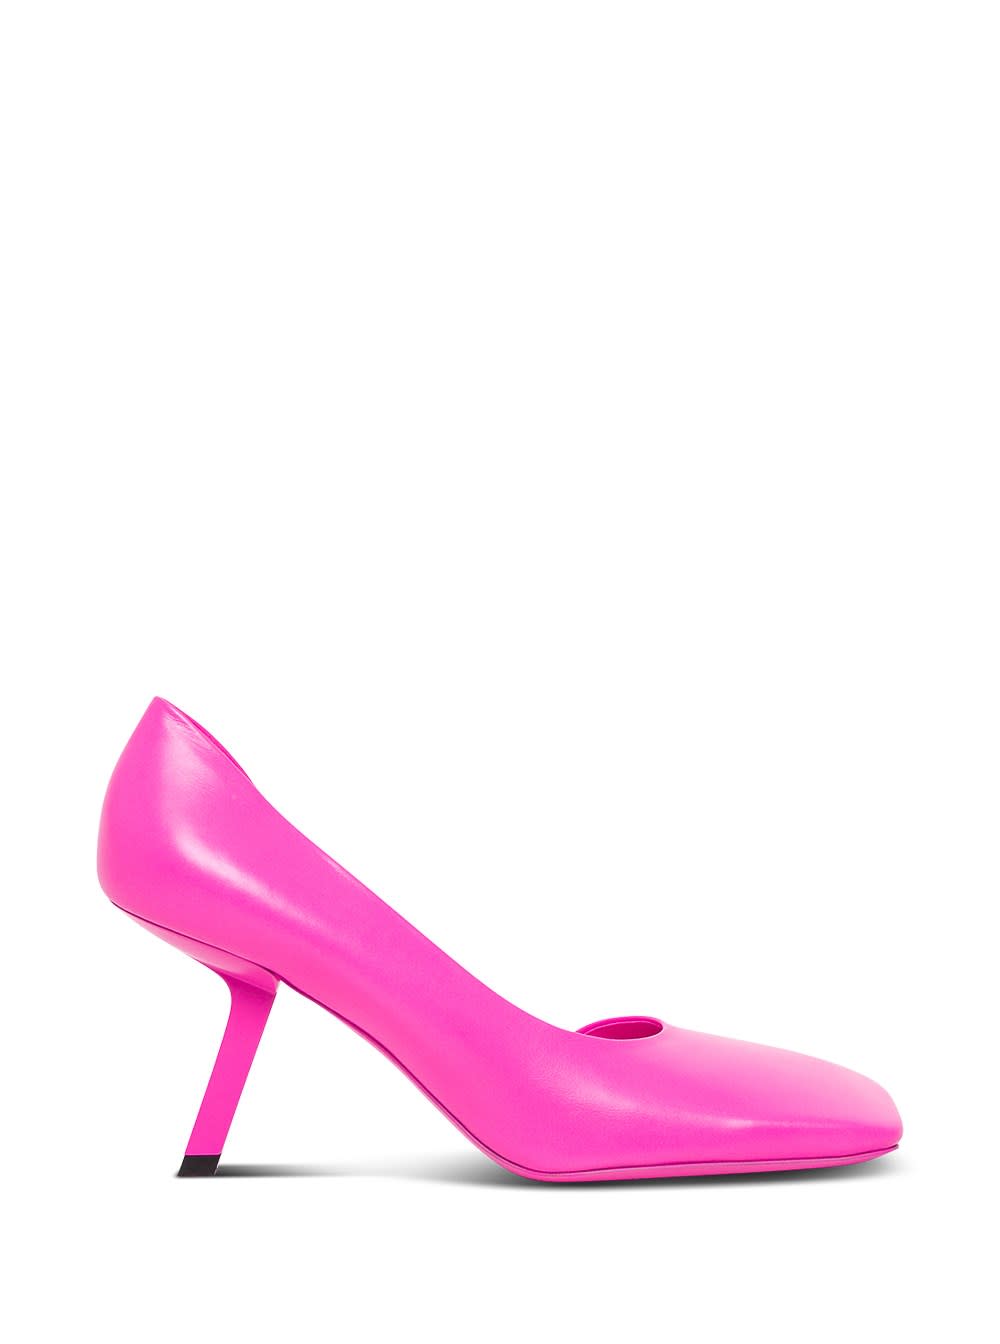 Balenciaga Void Dorsay Pumps In Pink Leather